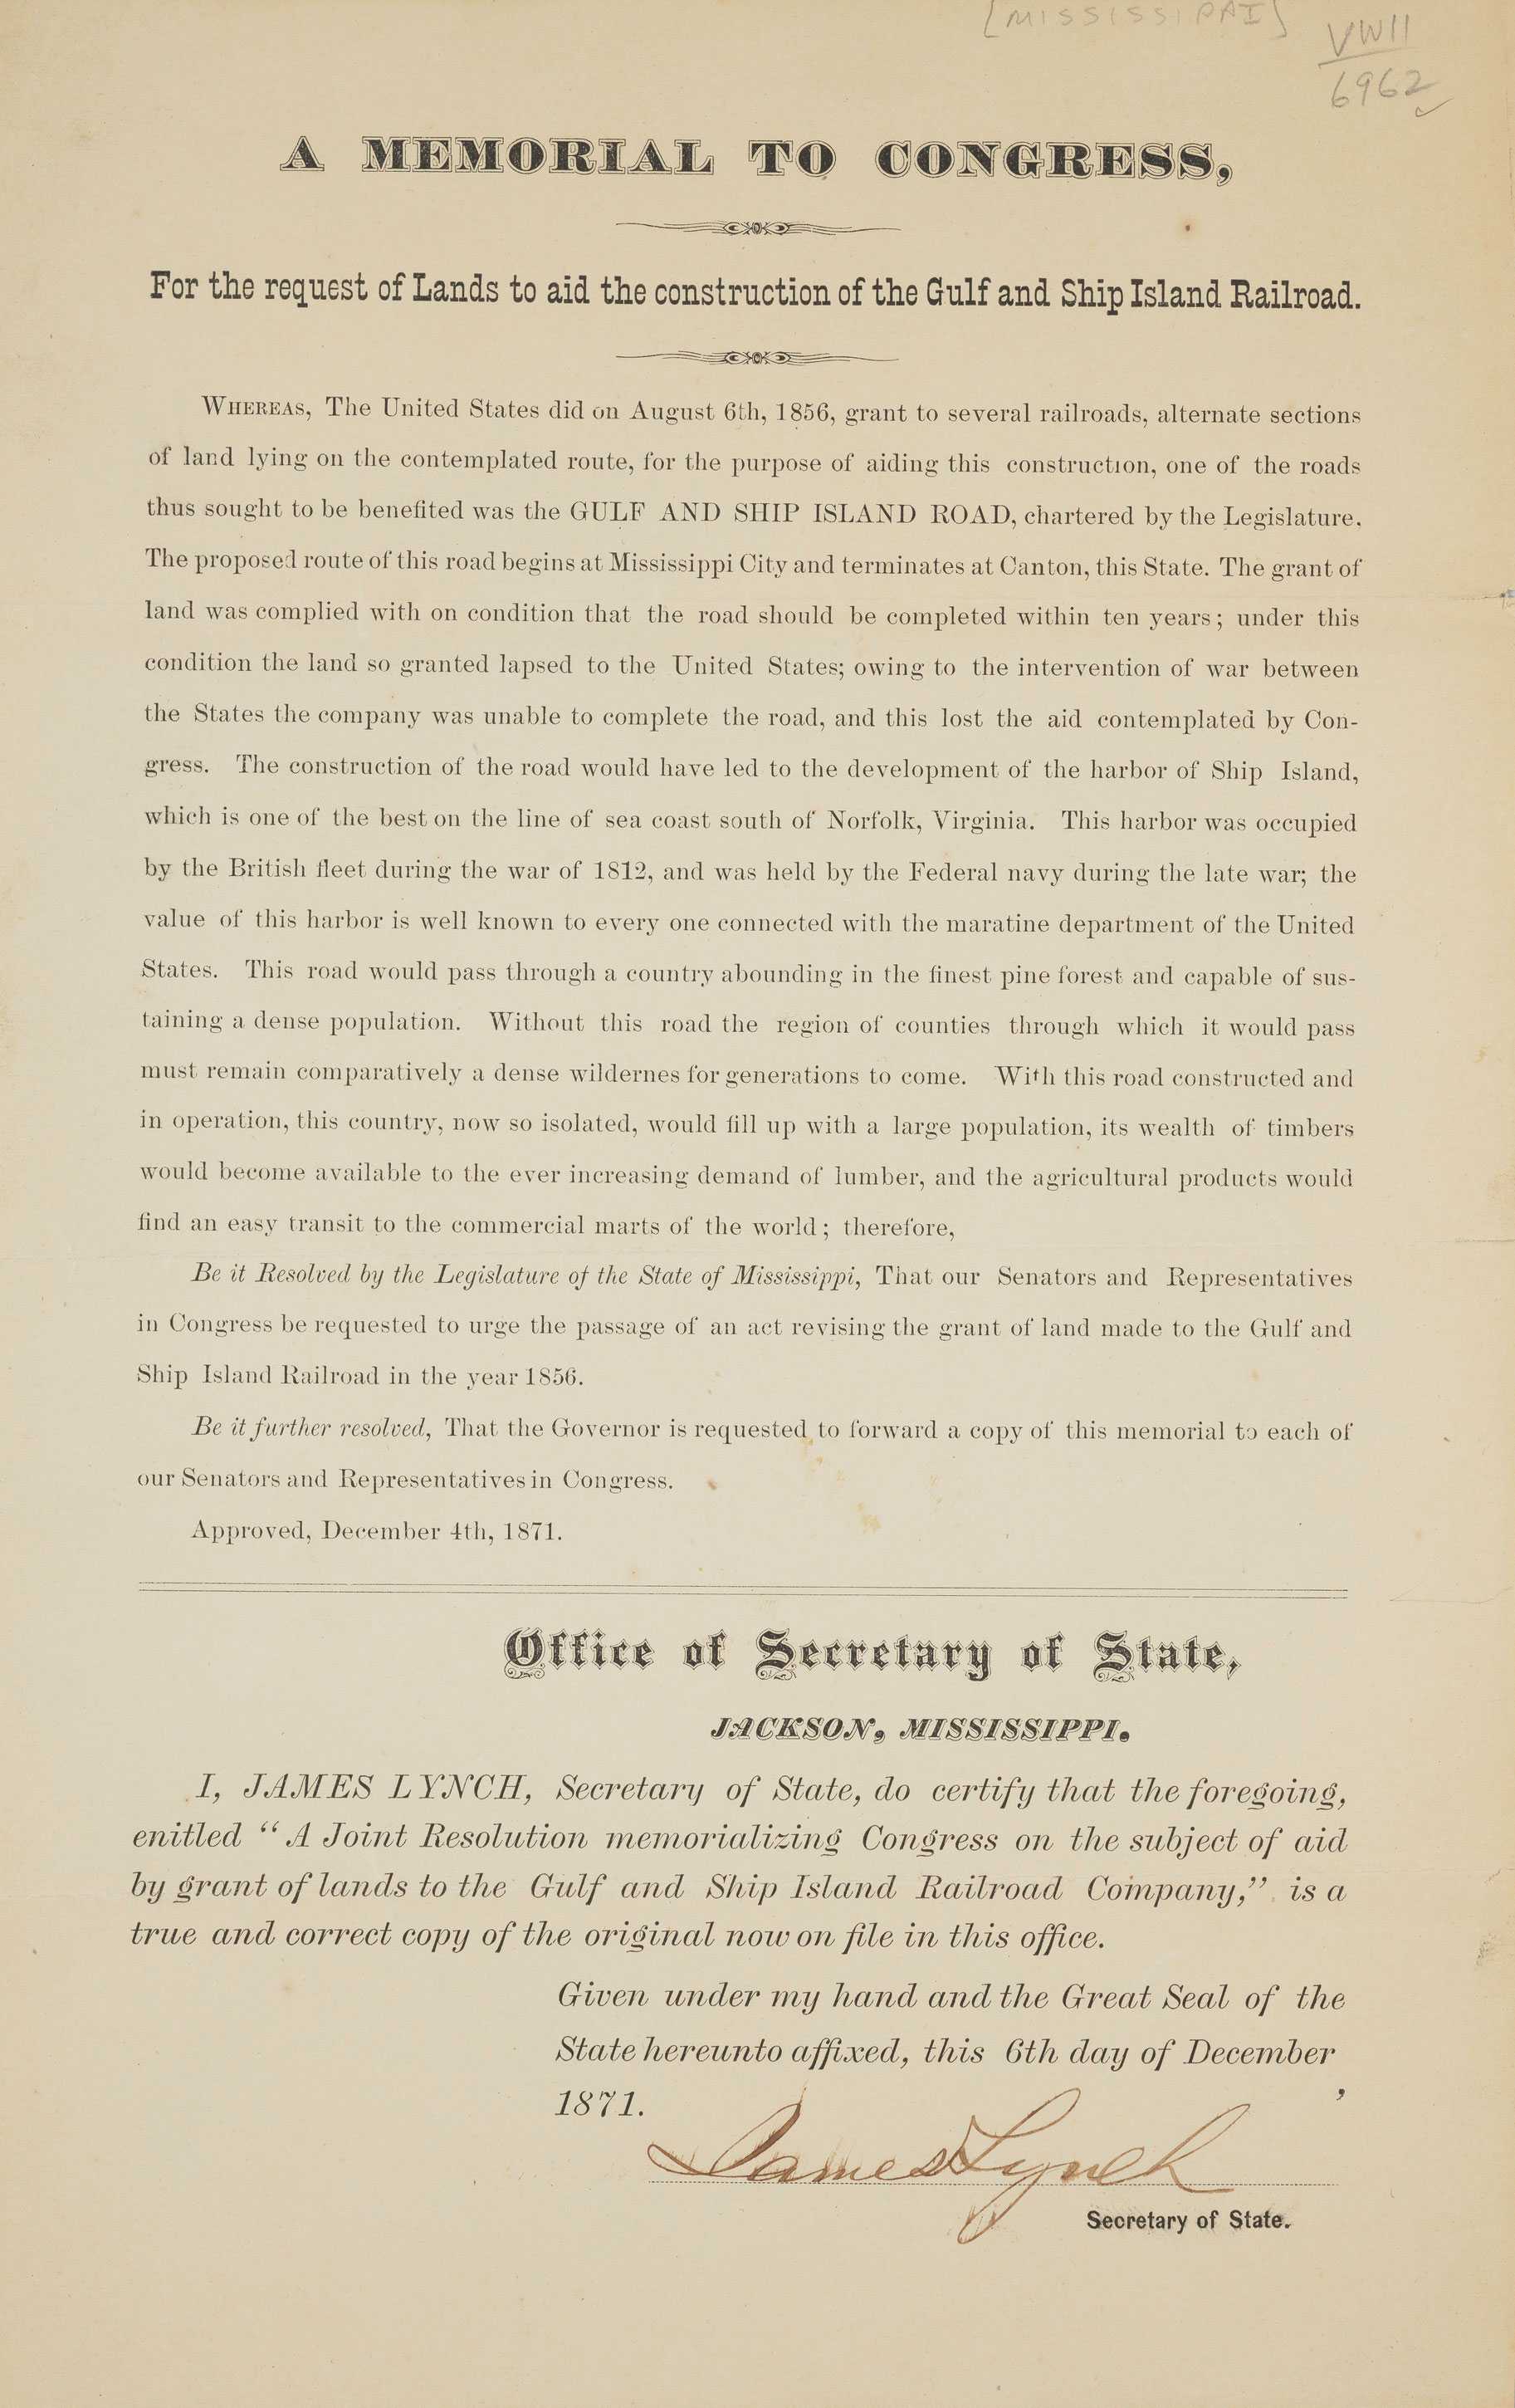 A document requesting Gulf and Ship Island Railroad construction aid from Congress